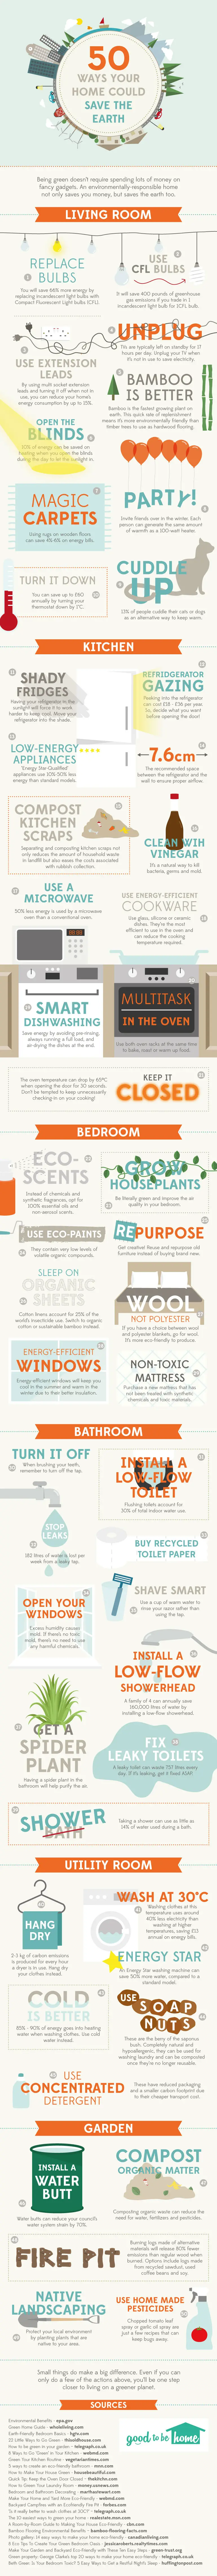 50-ways-your-home-could-save-the-earth Infographic